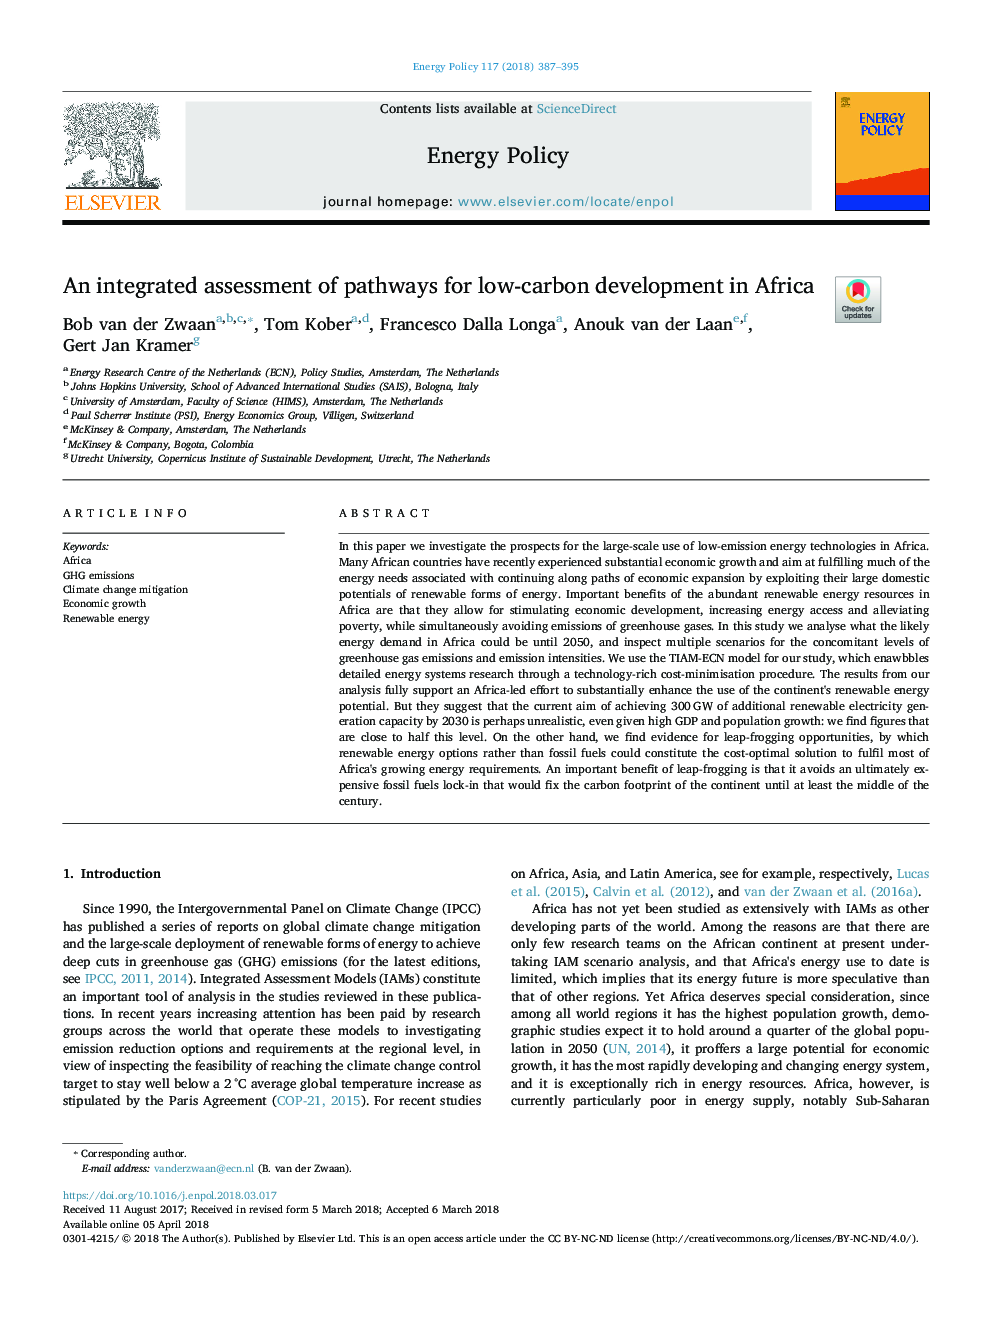 An integrated assessment of pathways for low-carbon development in Africa